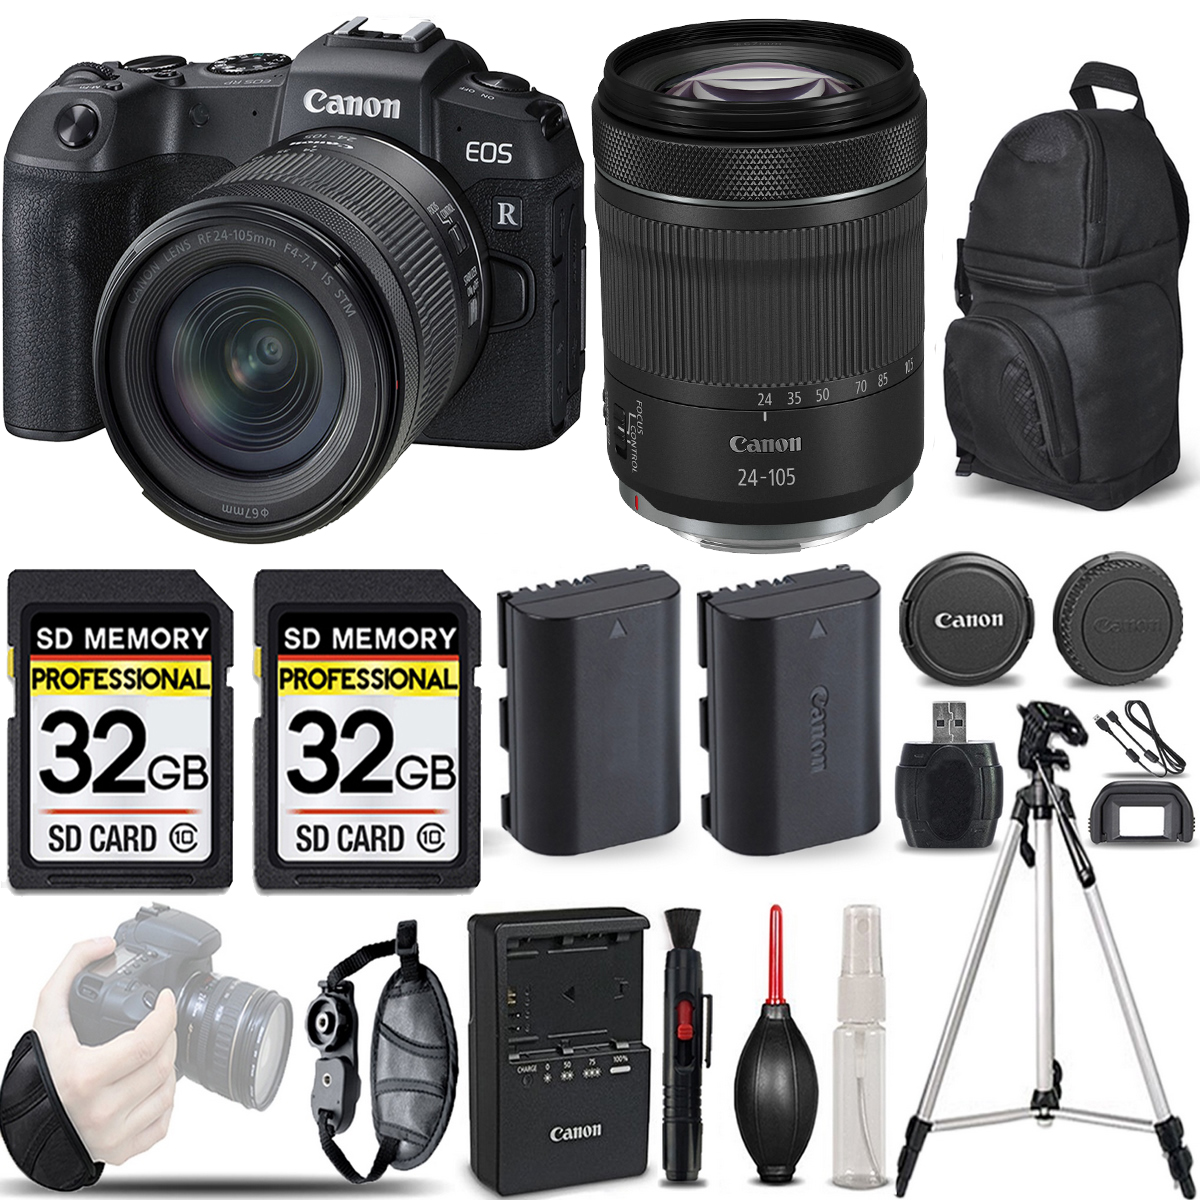 EOS RP Mirrorless 26.2MP Camera + 24-105mm f/4-7.1 Lens IS STM - LOADED KIT *FREE SHIPPING*